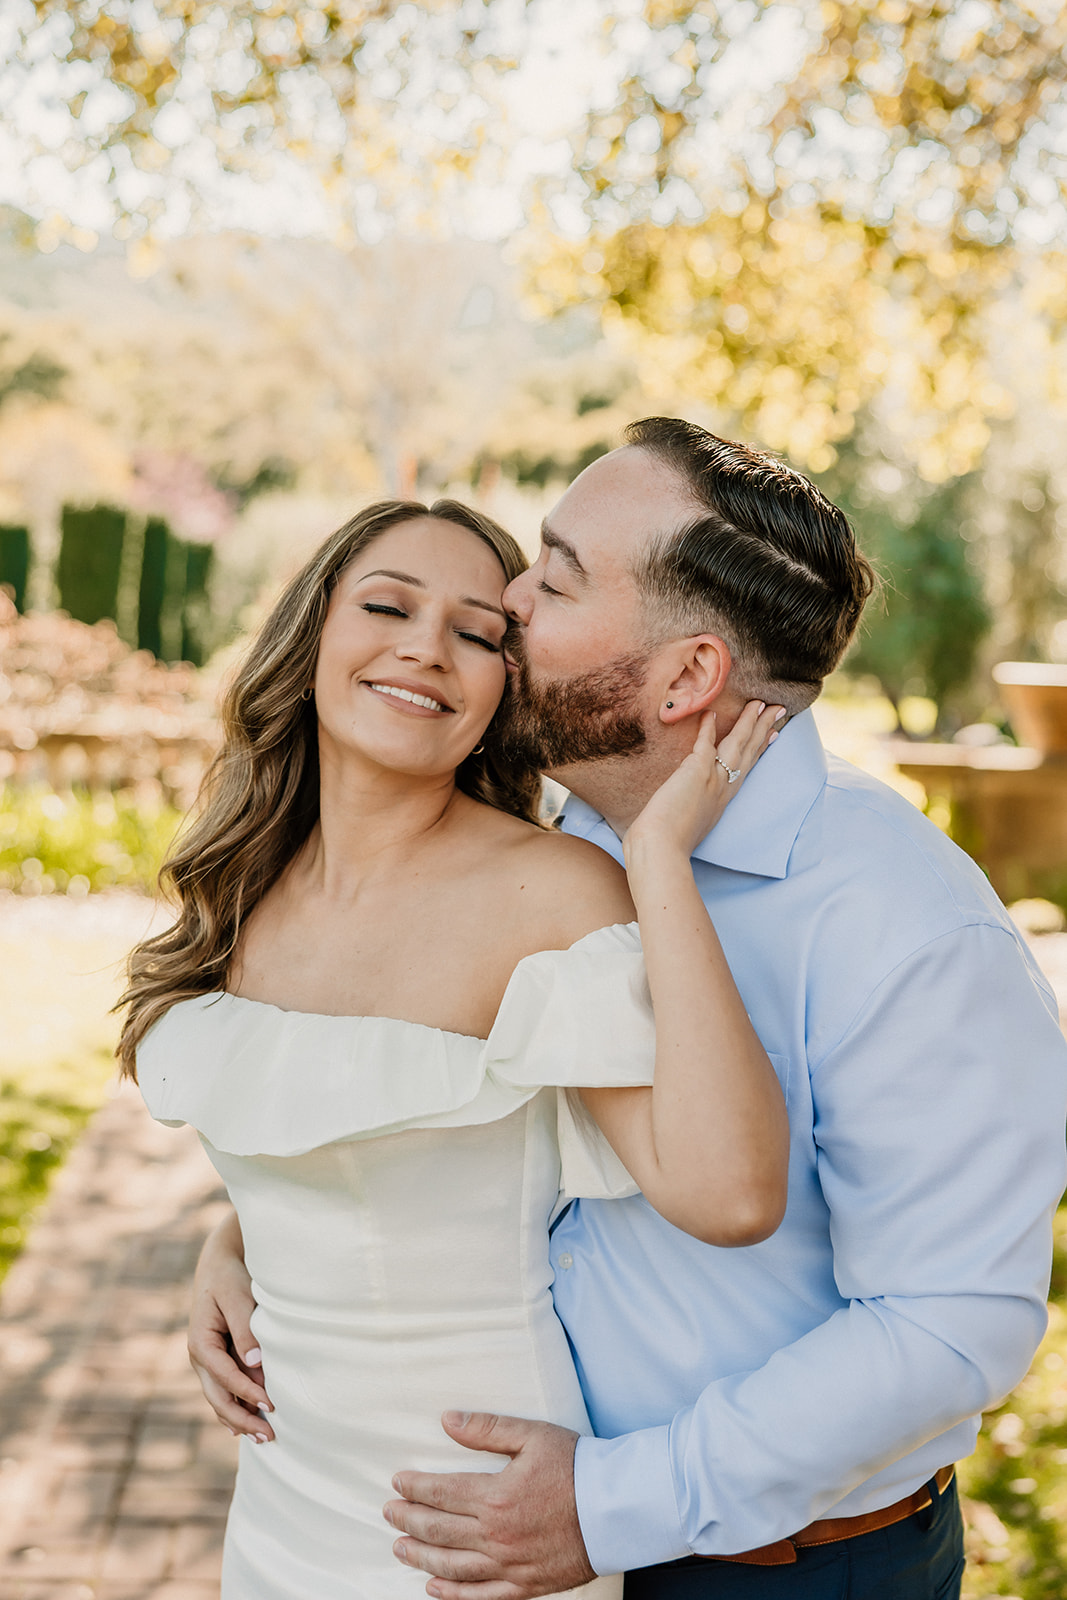 A man in a blue shirt kisses a woman in a white dress on the cheek while standing in a sunlit garden for their engagement photos at the filoli gardens